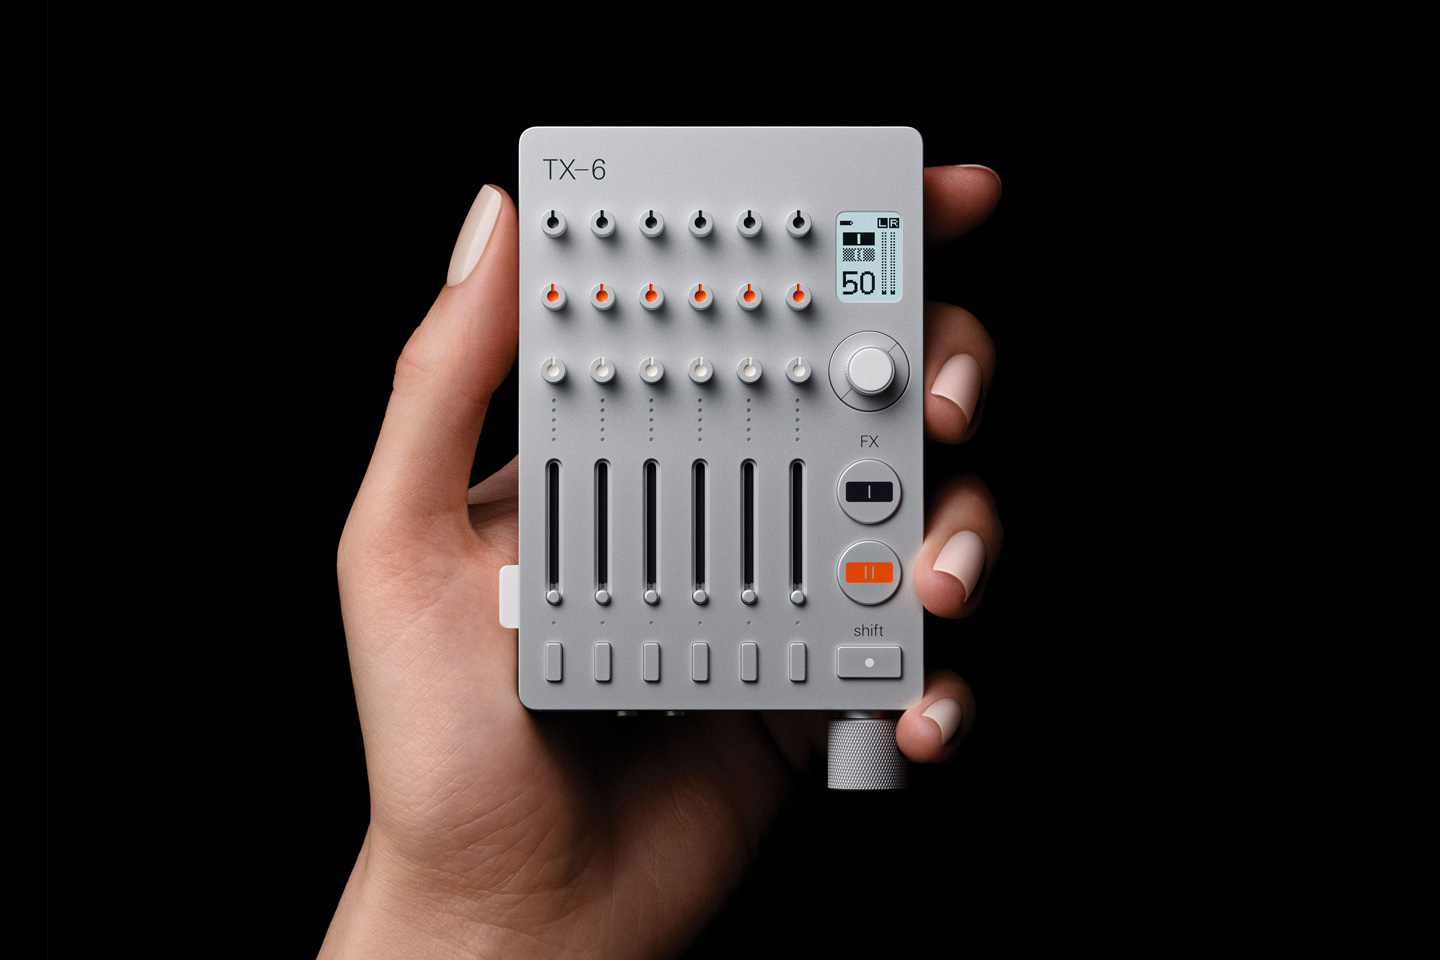 #The Teenage Engineering TX-6 is a powerful handheld mixer that’s perfect for podcast production